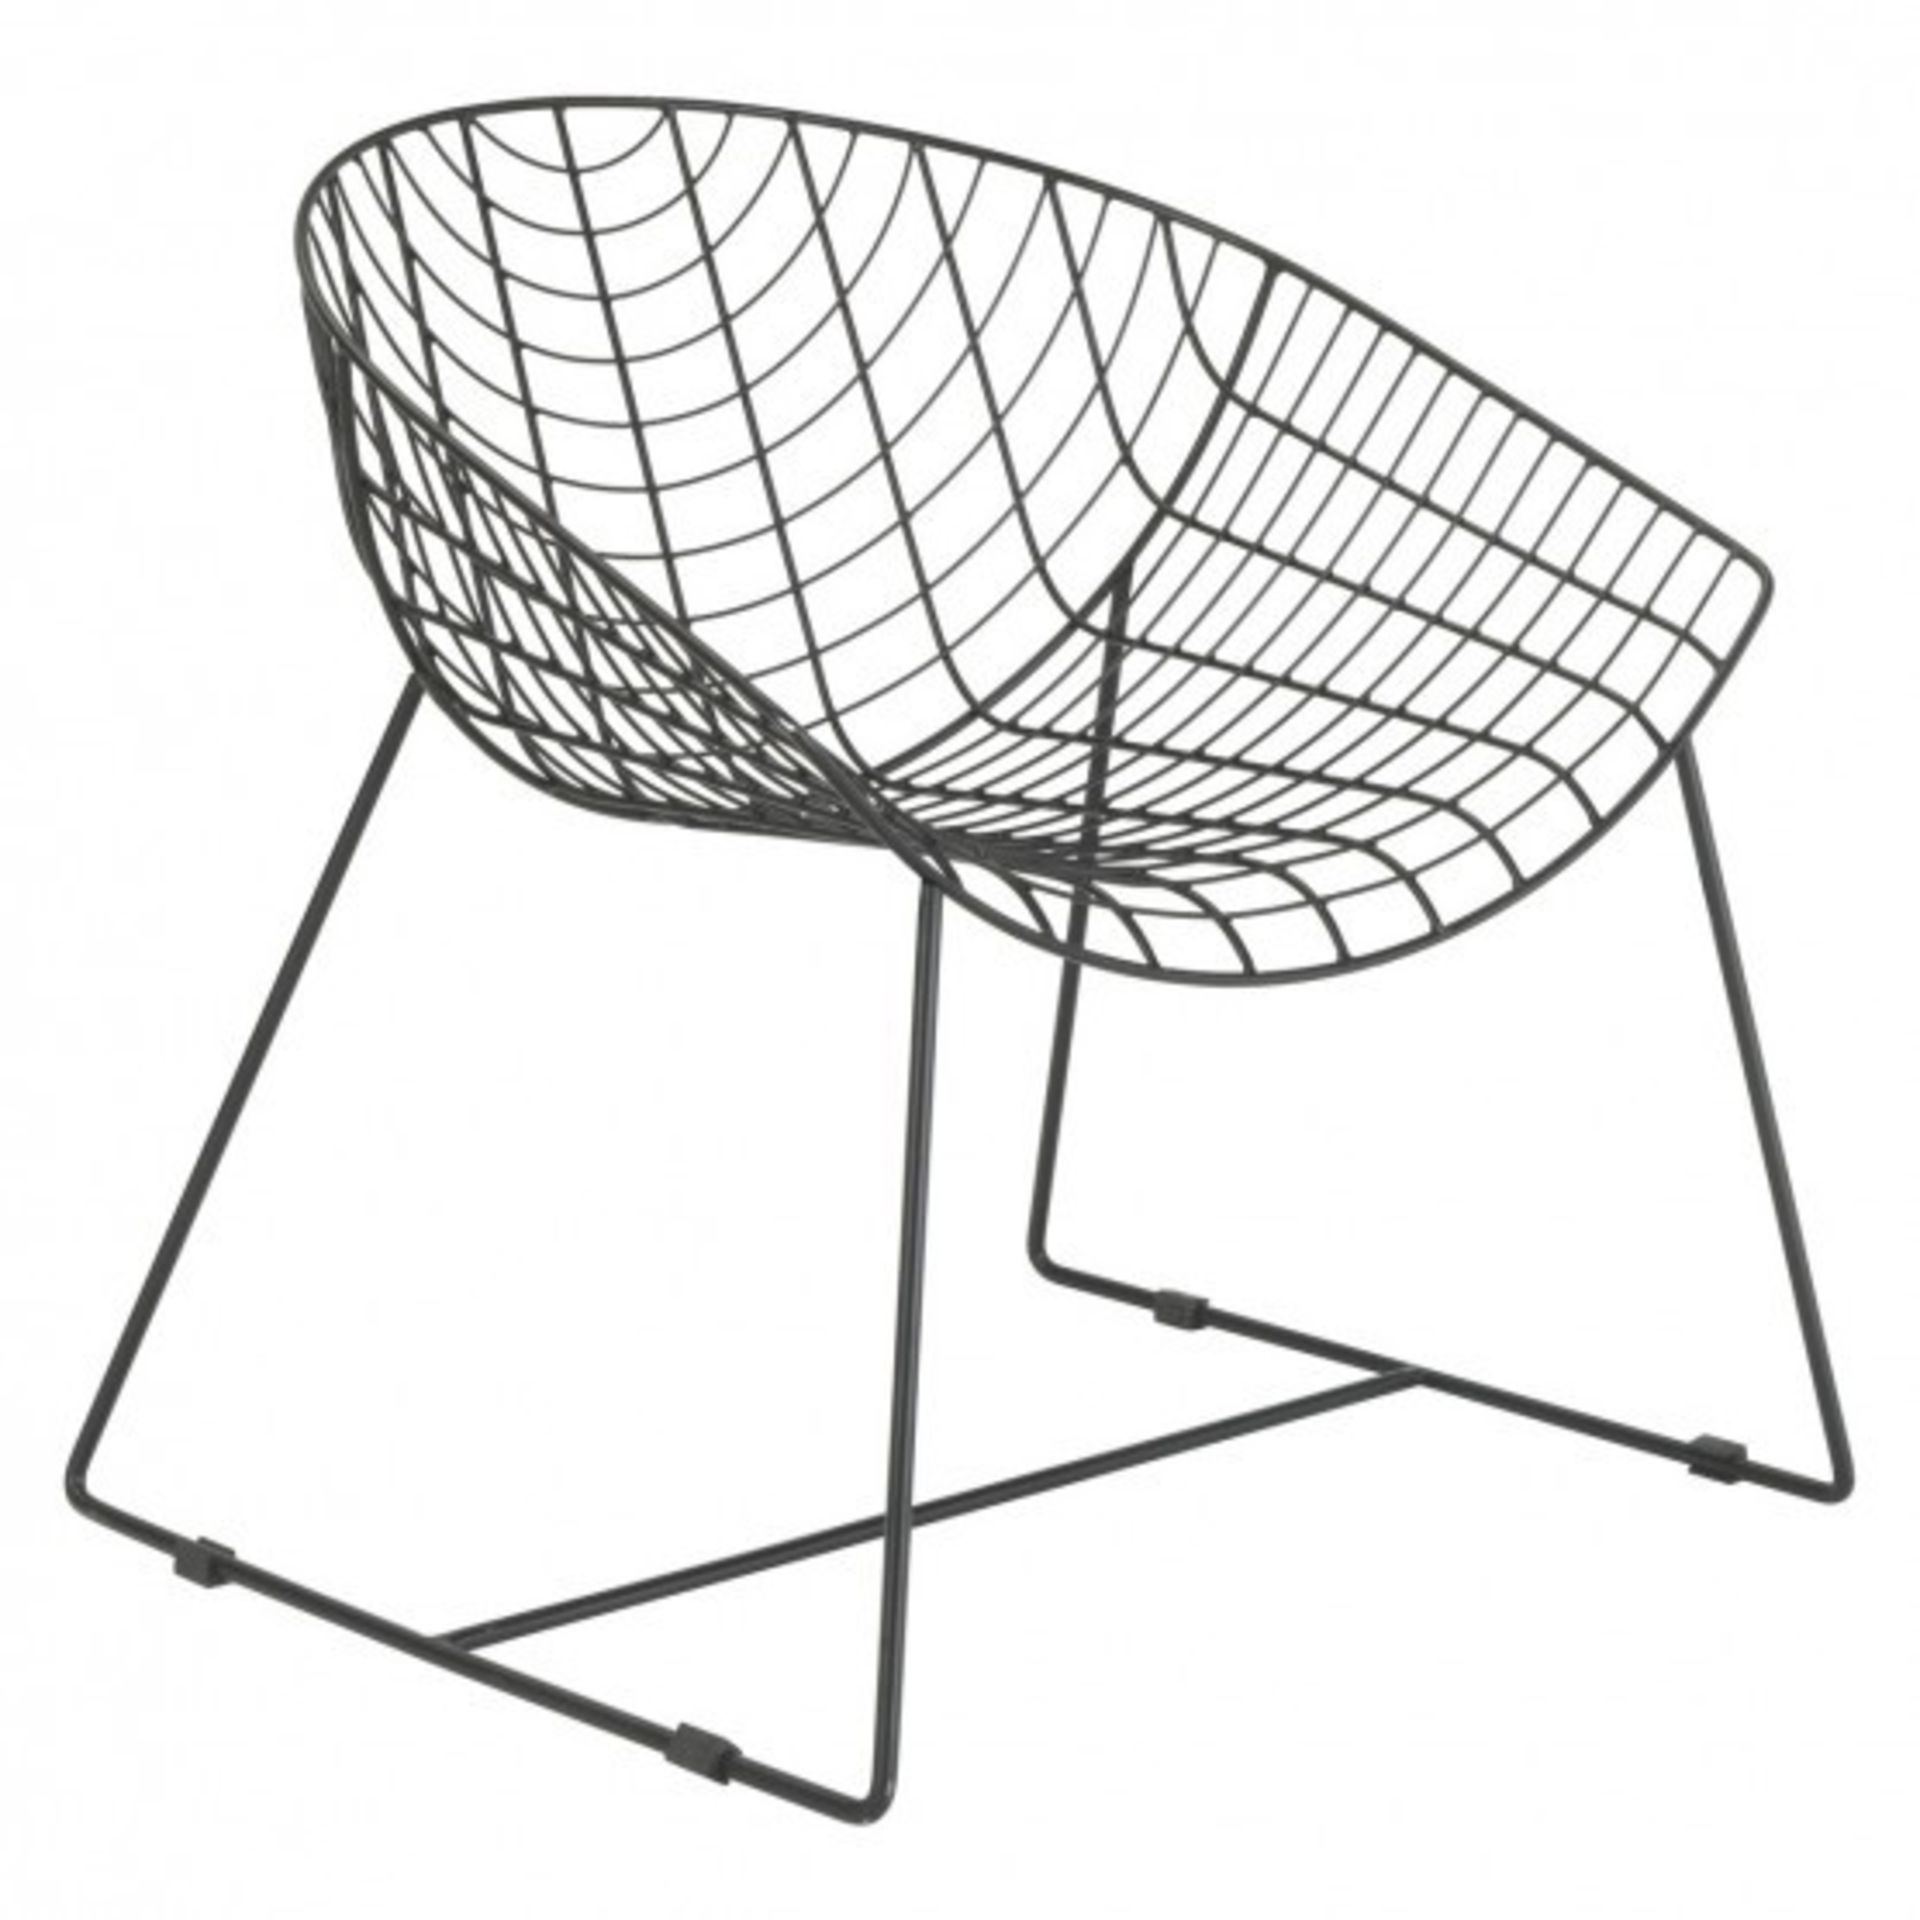 1 GRADE A BOXED HABITAT LEOPOLD BLACK WIRE CHAIR / RRP £125.00 (VIEWING HIGHLY RECOMMENDED)